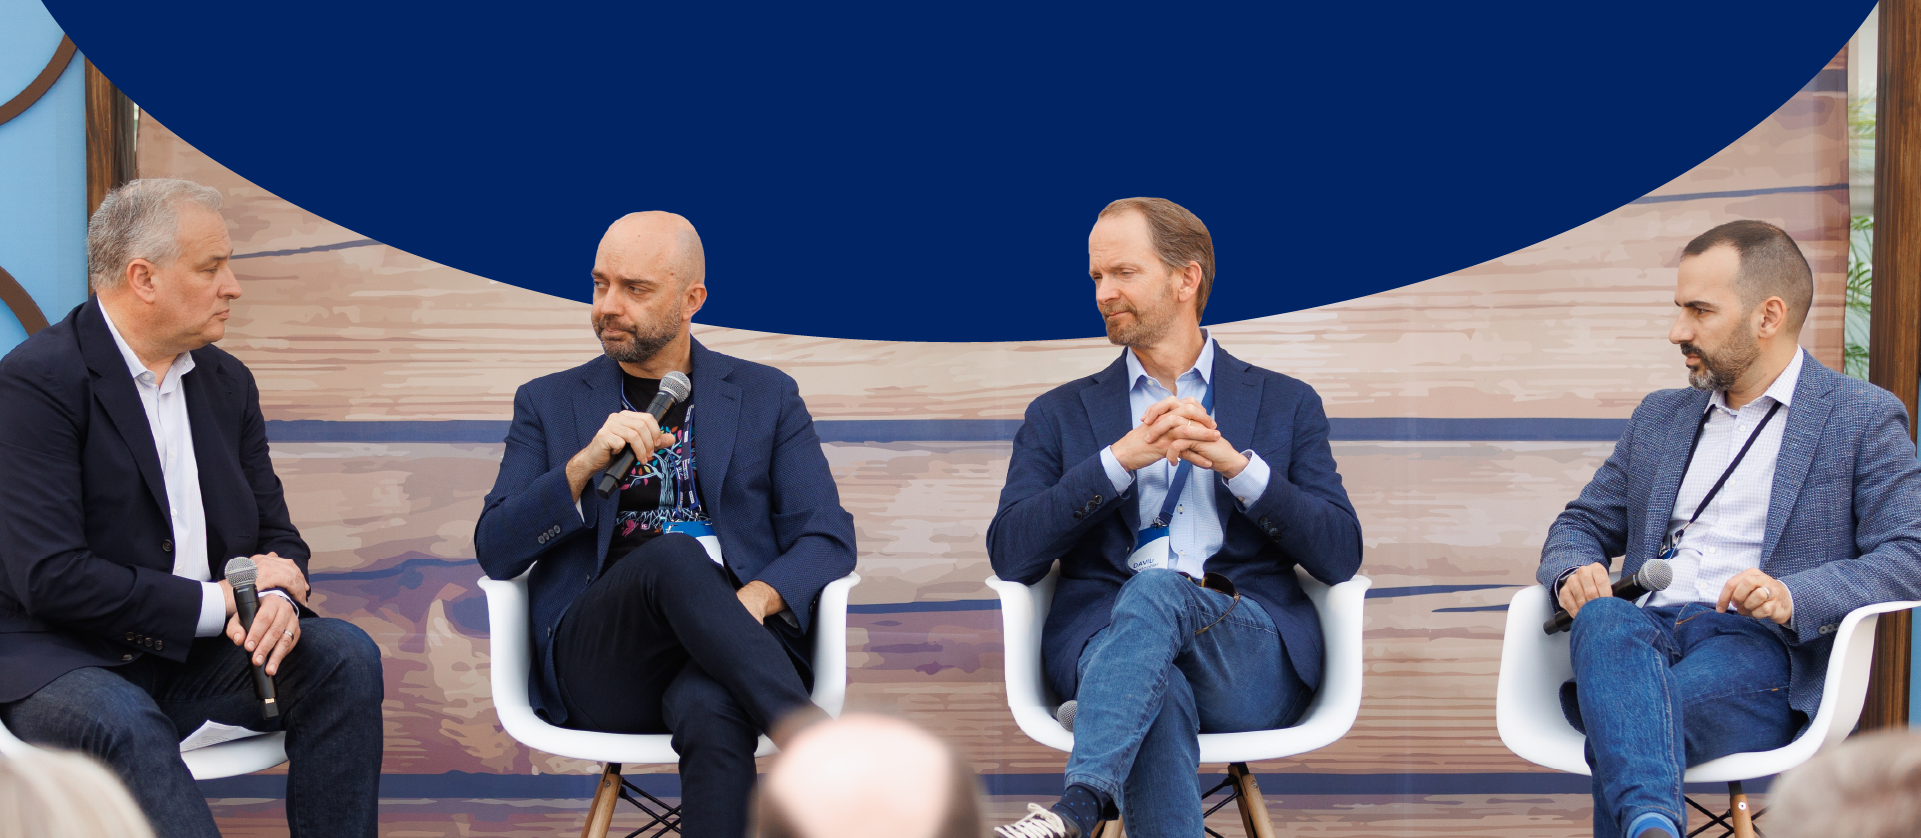 Tasso Argyos, Founder and CEO, ActionIQ and David Christopher, EVP & GM, Partnerships and 5G Ecosystem Development, AT&T joined Armen and moderator Wes Nichols, Partner, March Capital to talk about how marketing and CX are converging.